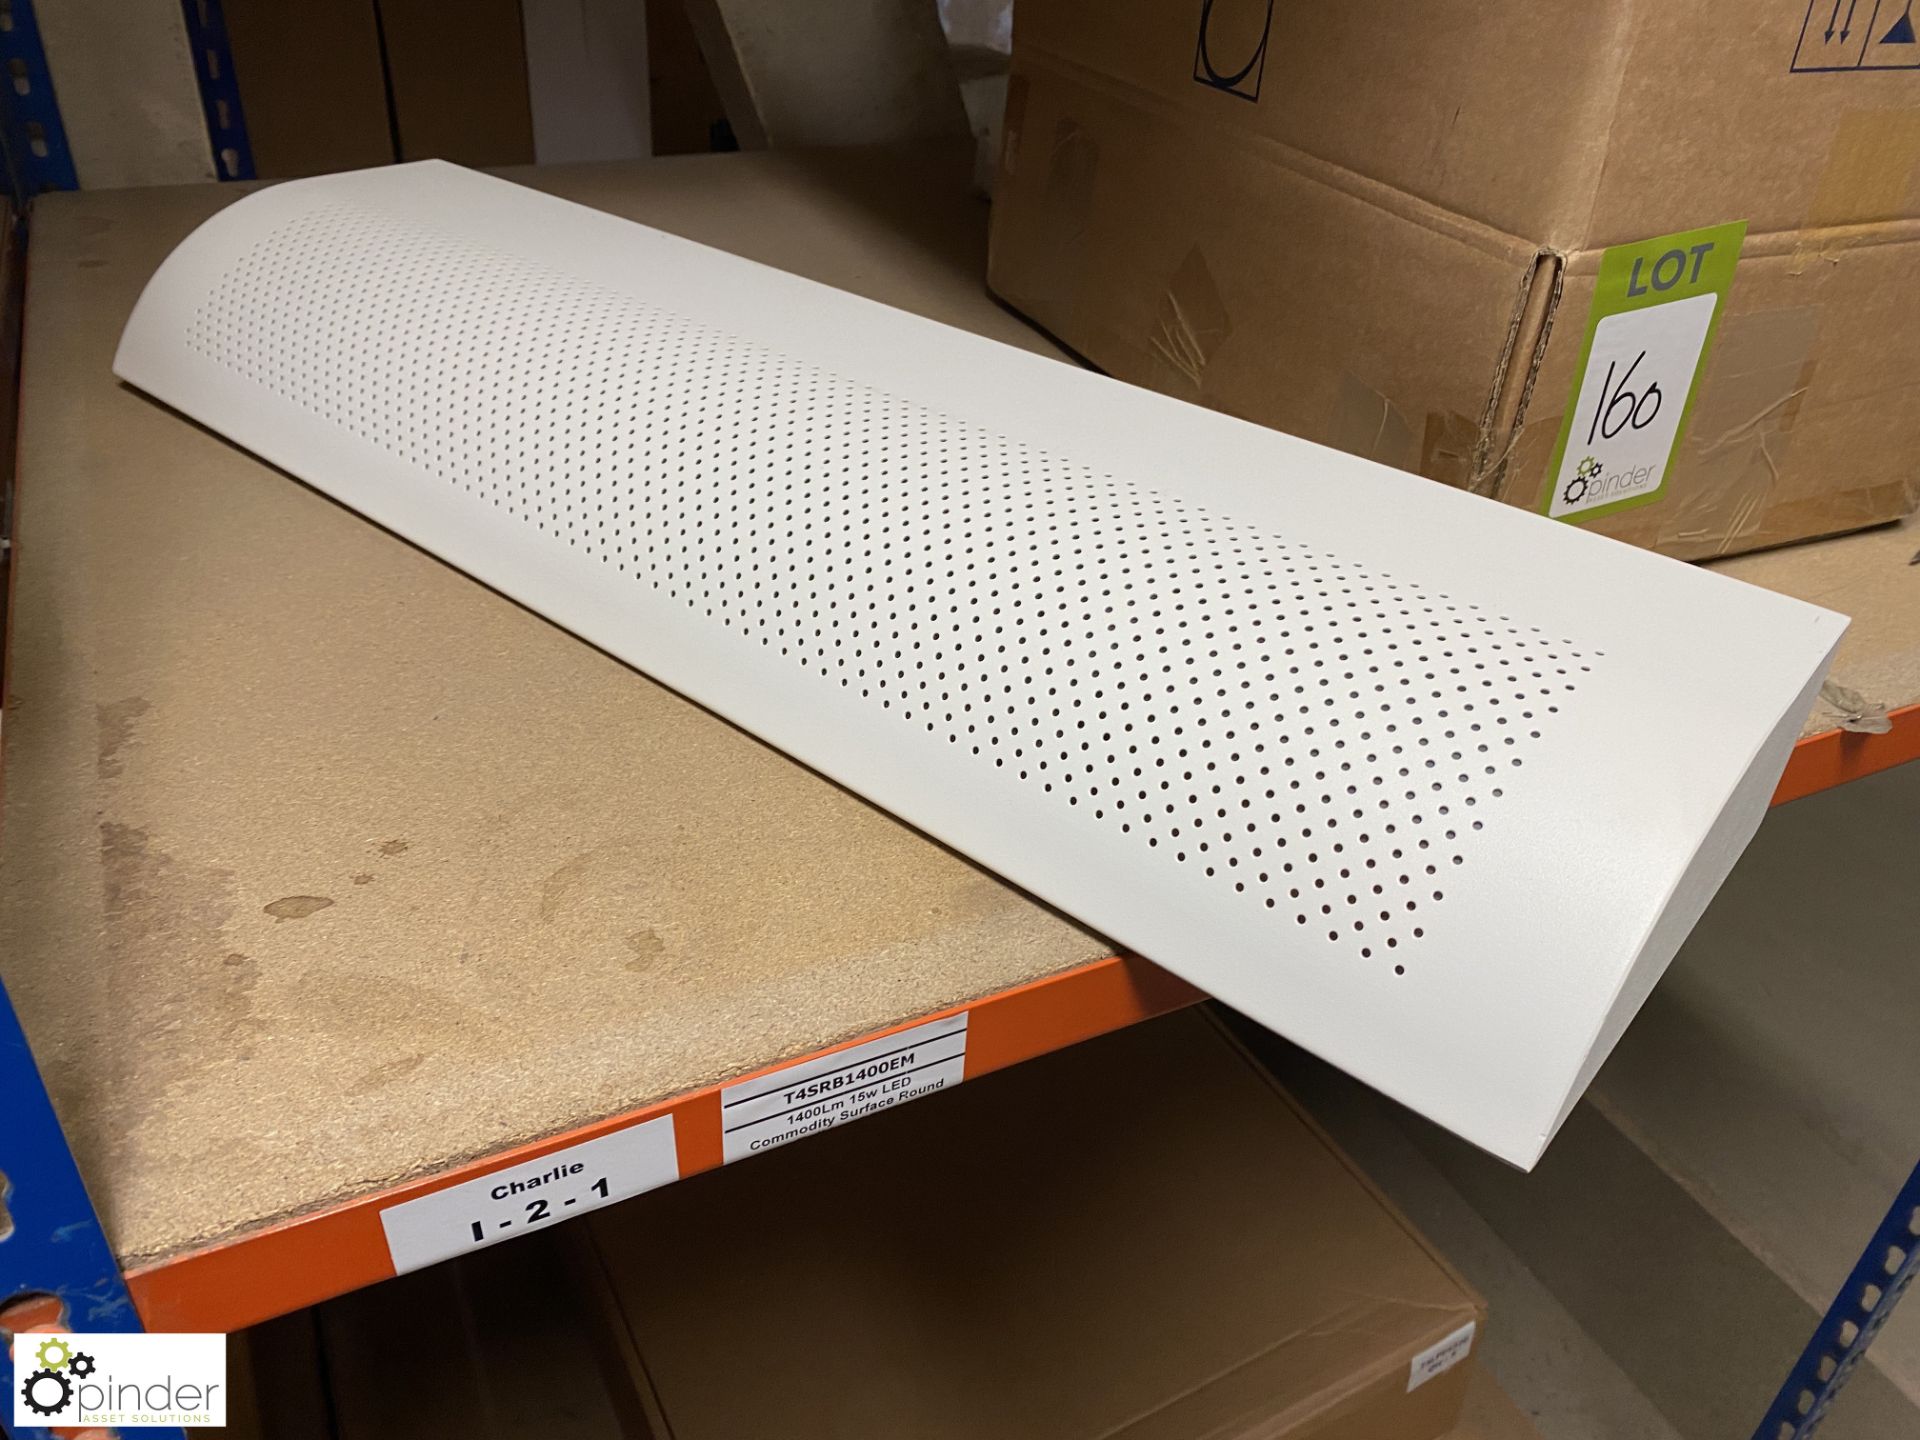 1 wall mounted Perforated Fitting, product code T3TUS2200 (located on mezzanine)